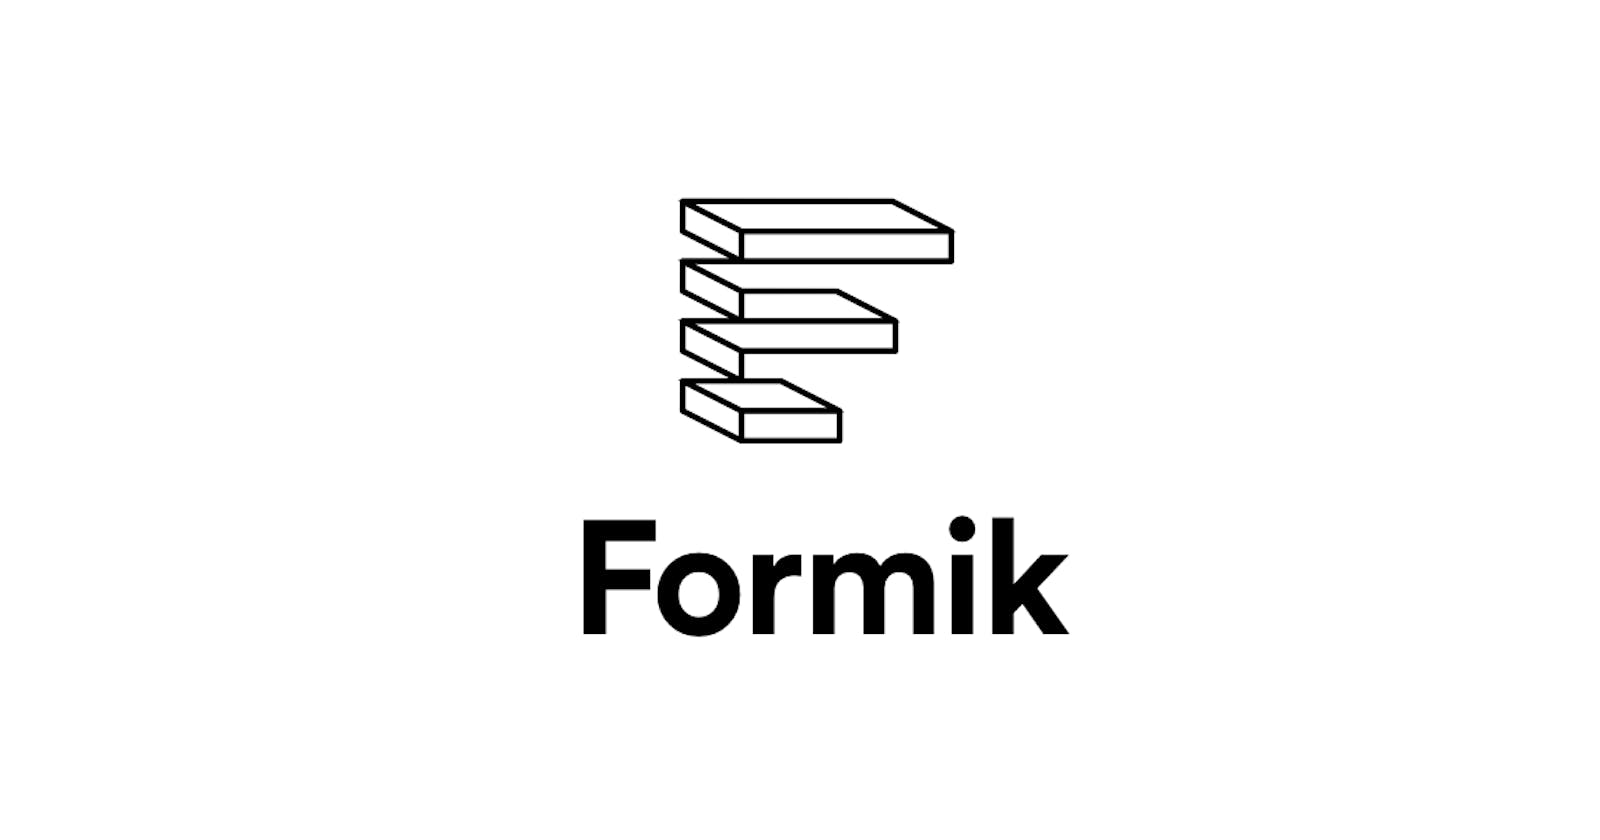 Create and Validate a Form in React JS Using Formik